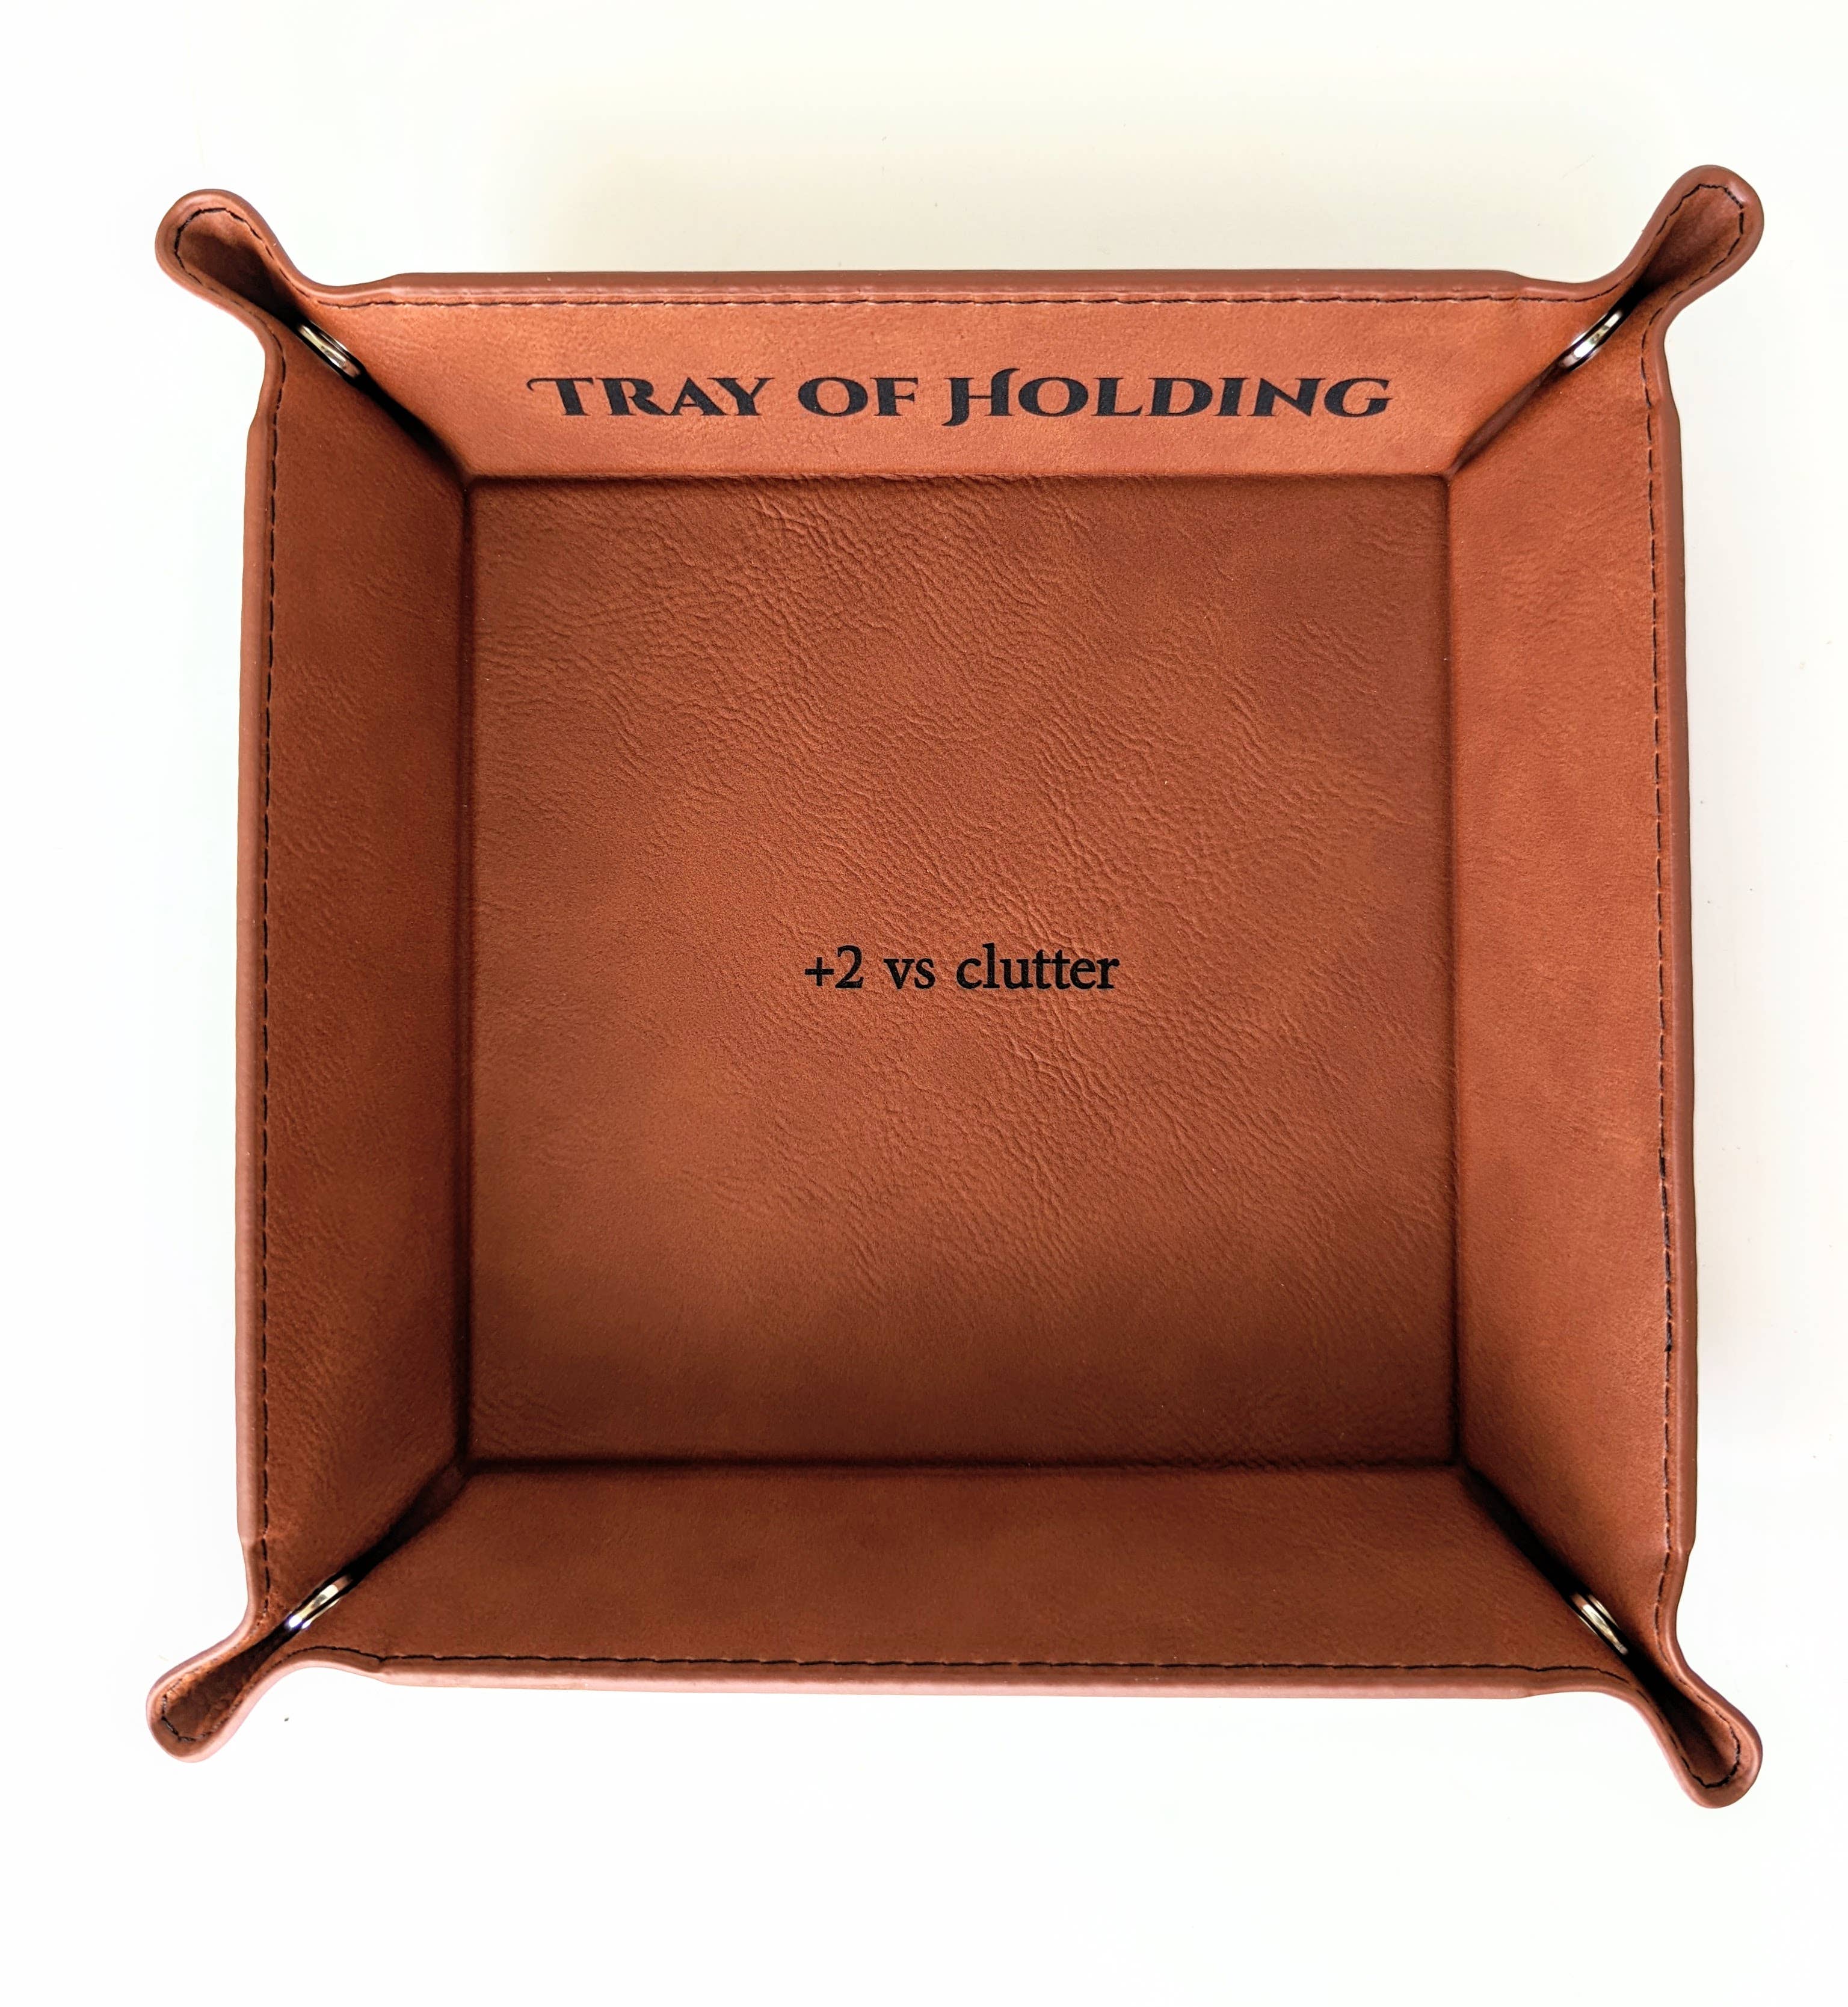 NTSD Gaming and Bookish Goods - Tray of Holding - Vegan Leather Catchall Rolling Tray - Bards & Cards